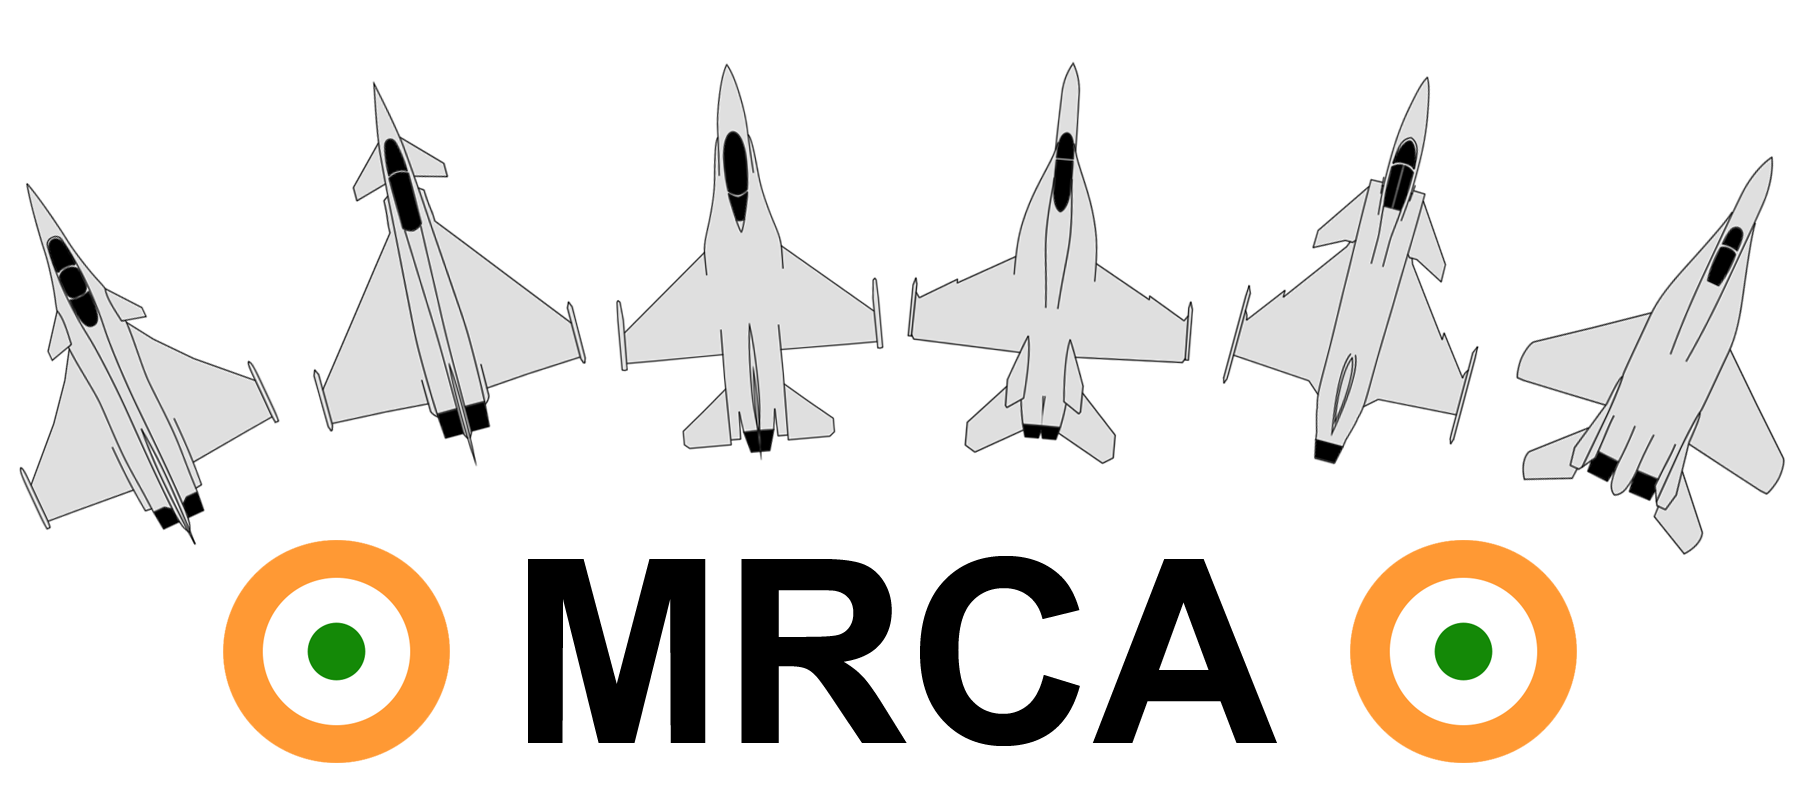 India_MRCA-6.png